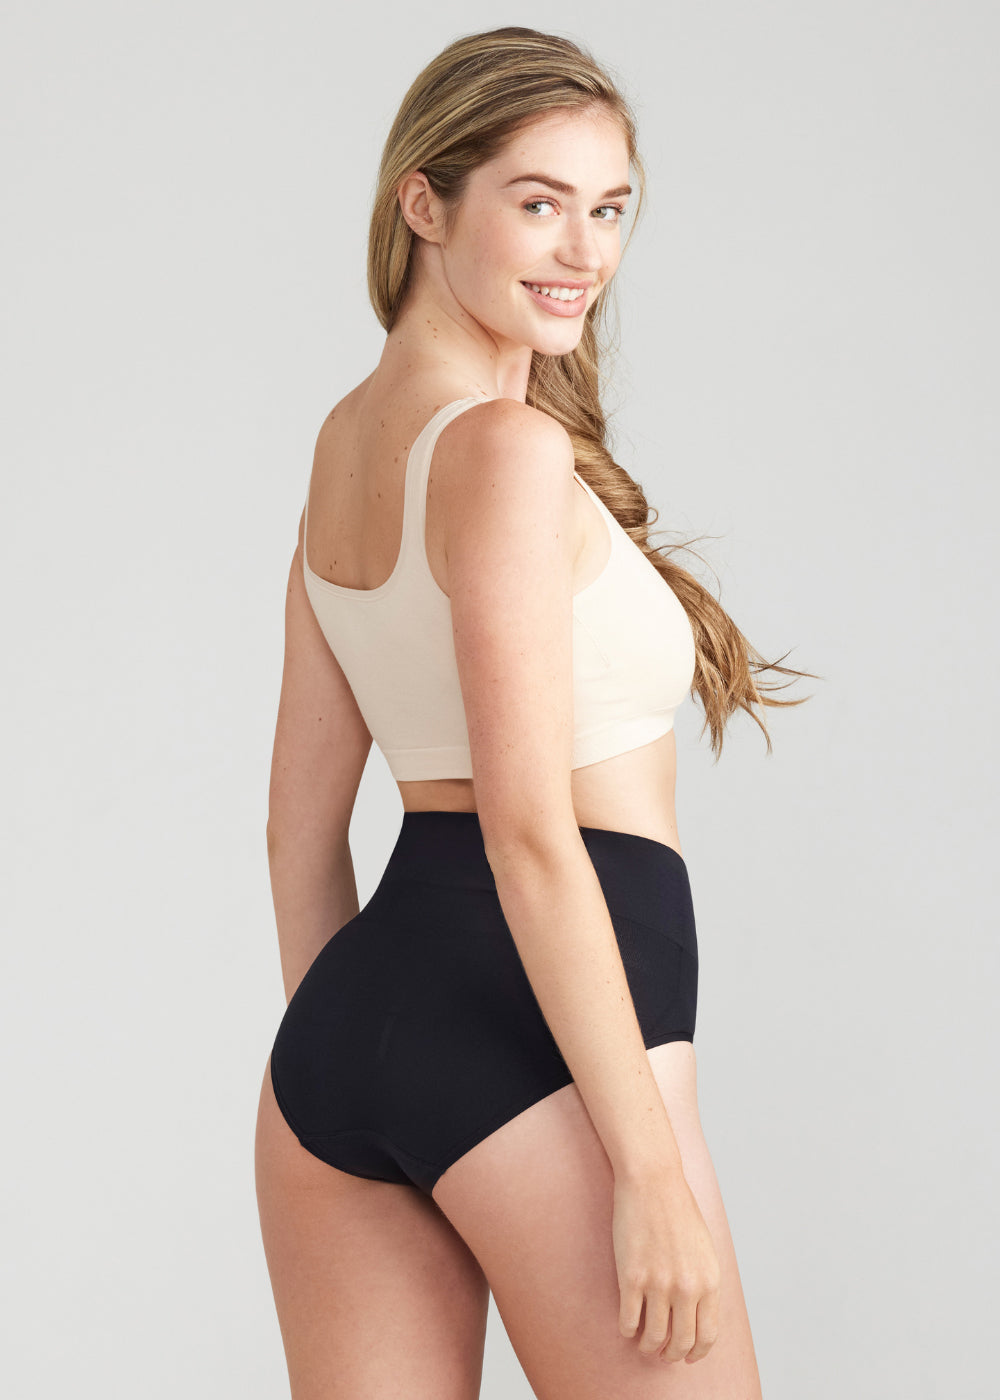 Yummie Livi Comfort Curve Smoothing Brief, Black, Size S/M, from Soma